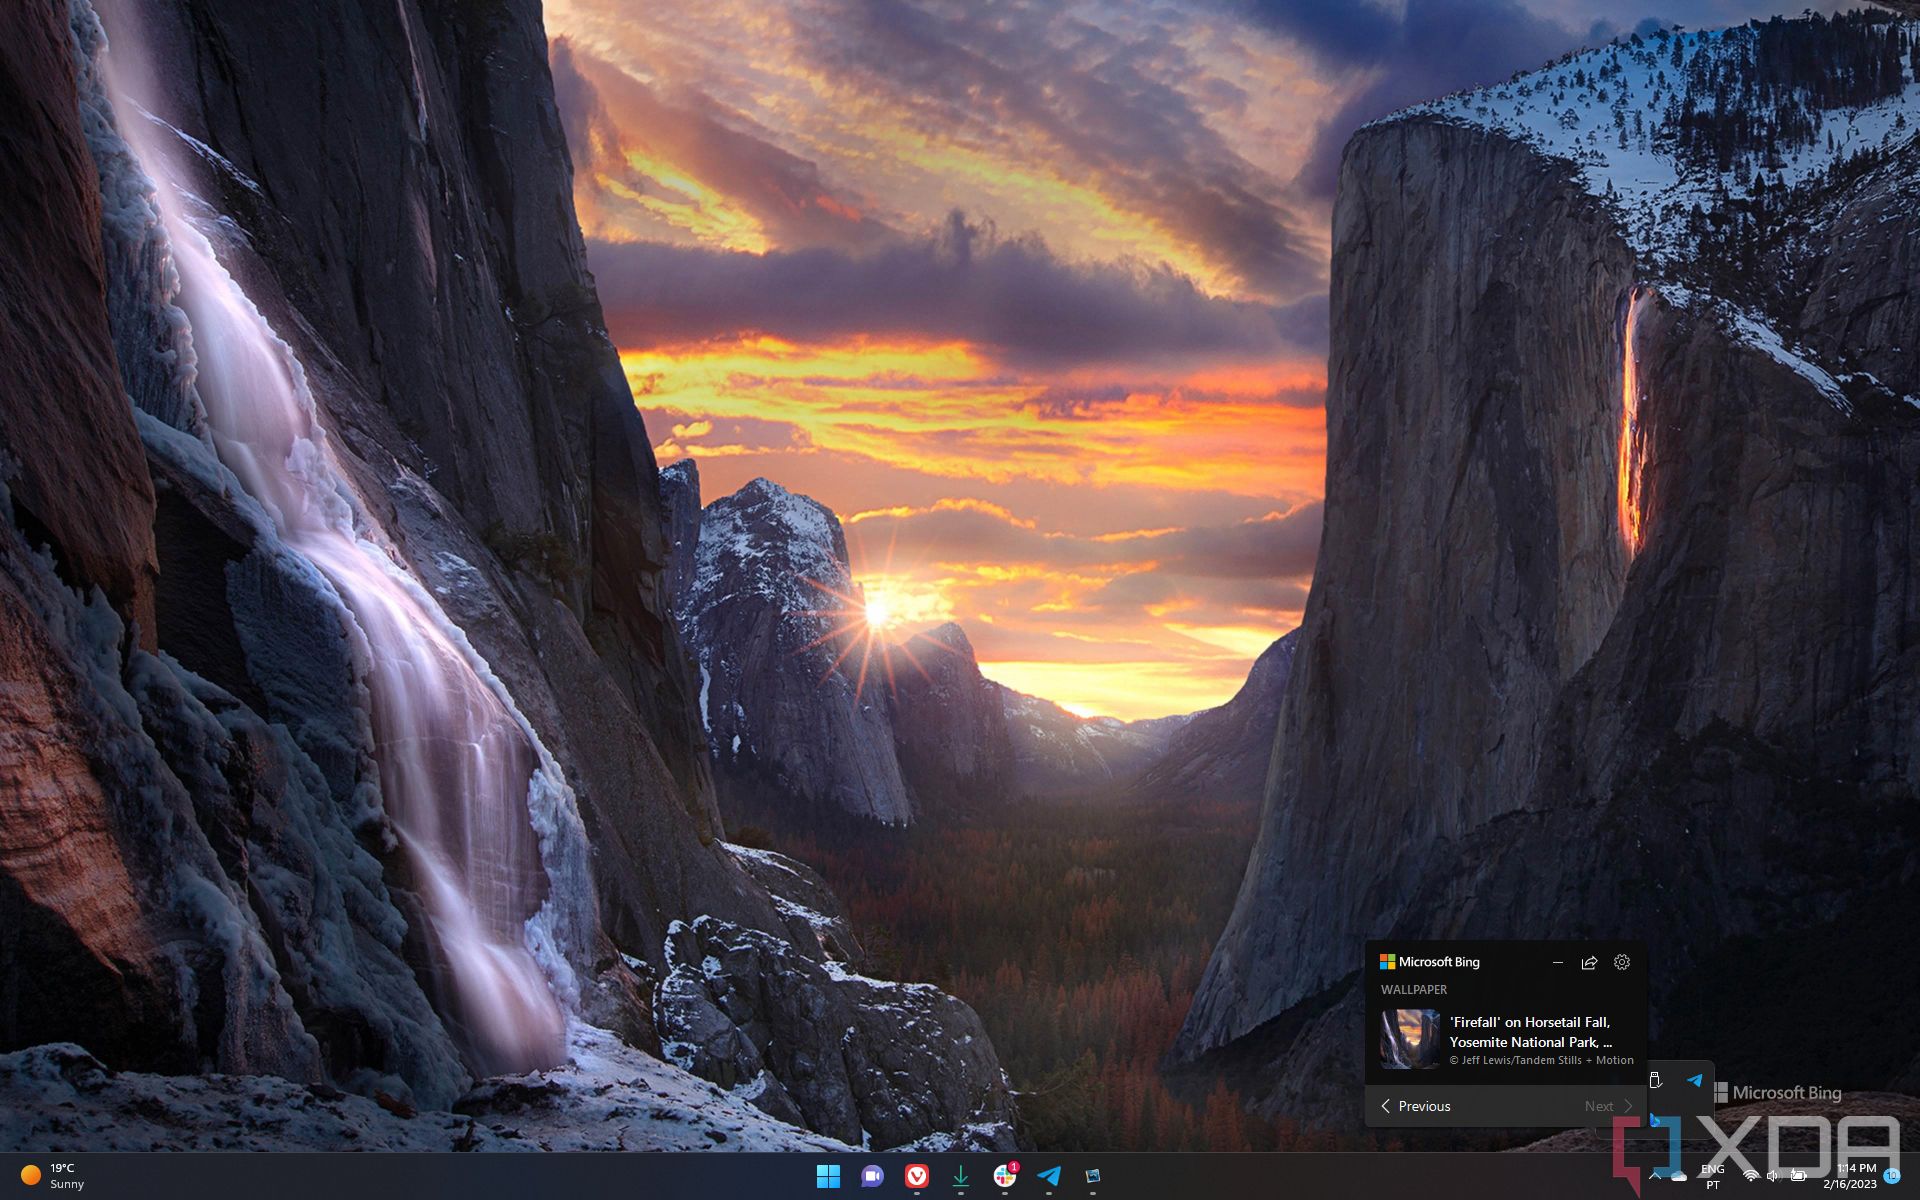 Screenshot of a Windows 11 desktop using a Bing wallpaper and displaying information about the current photo